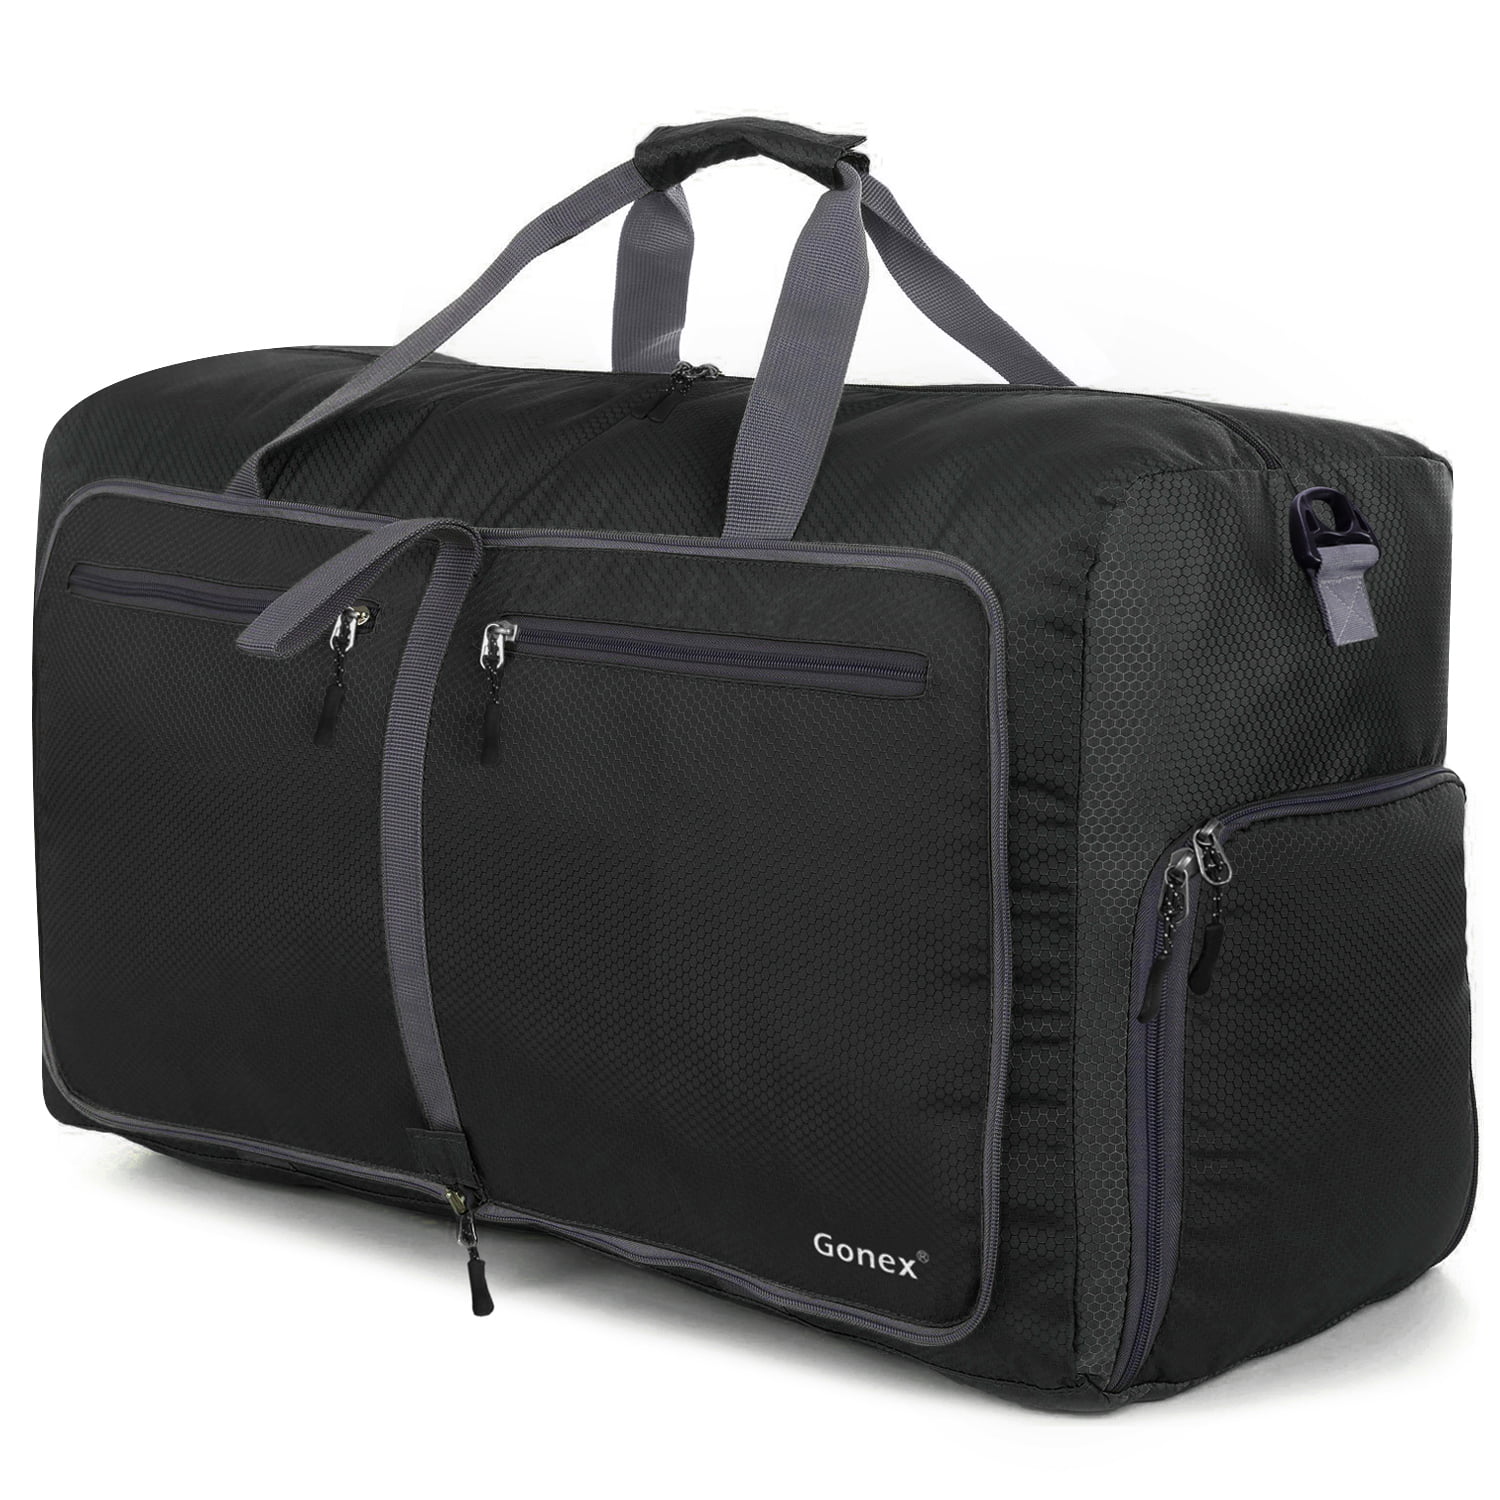 Gonex Duffle Bag Review | Literacy Ontario Central South